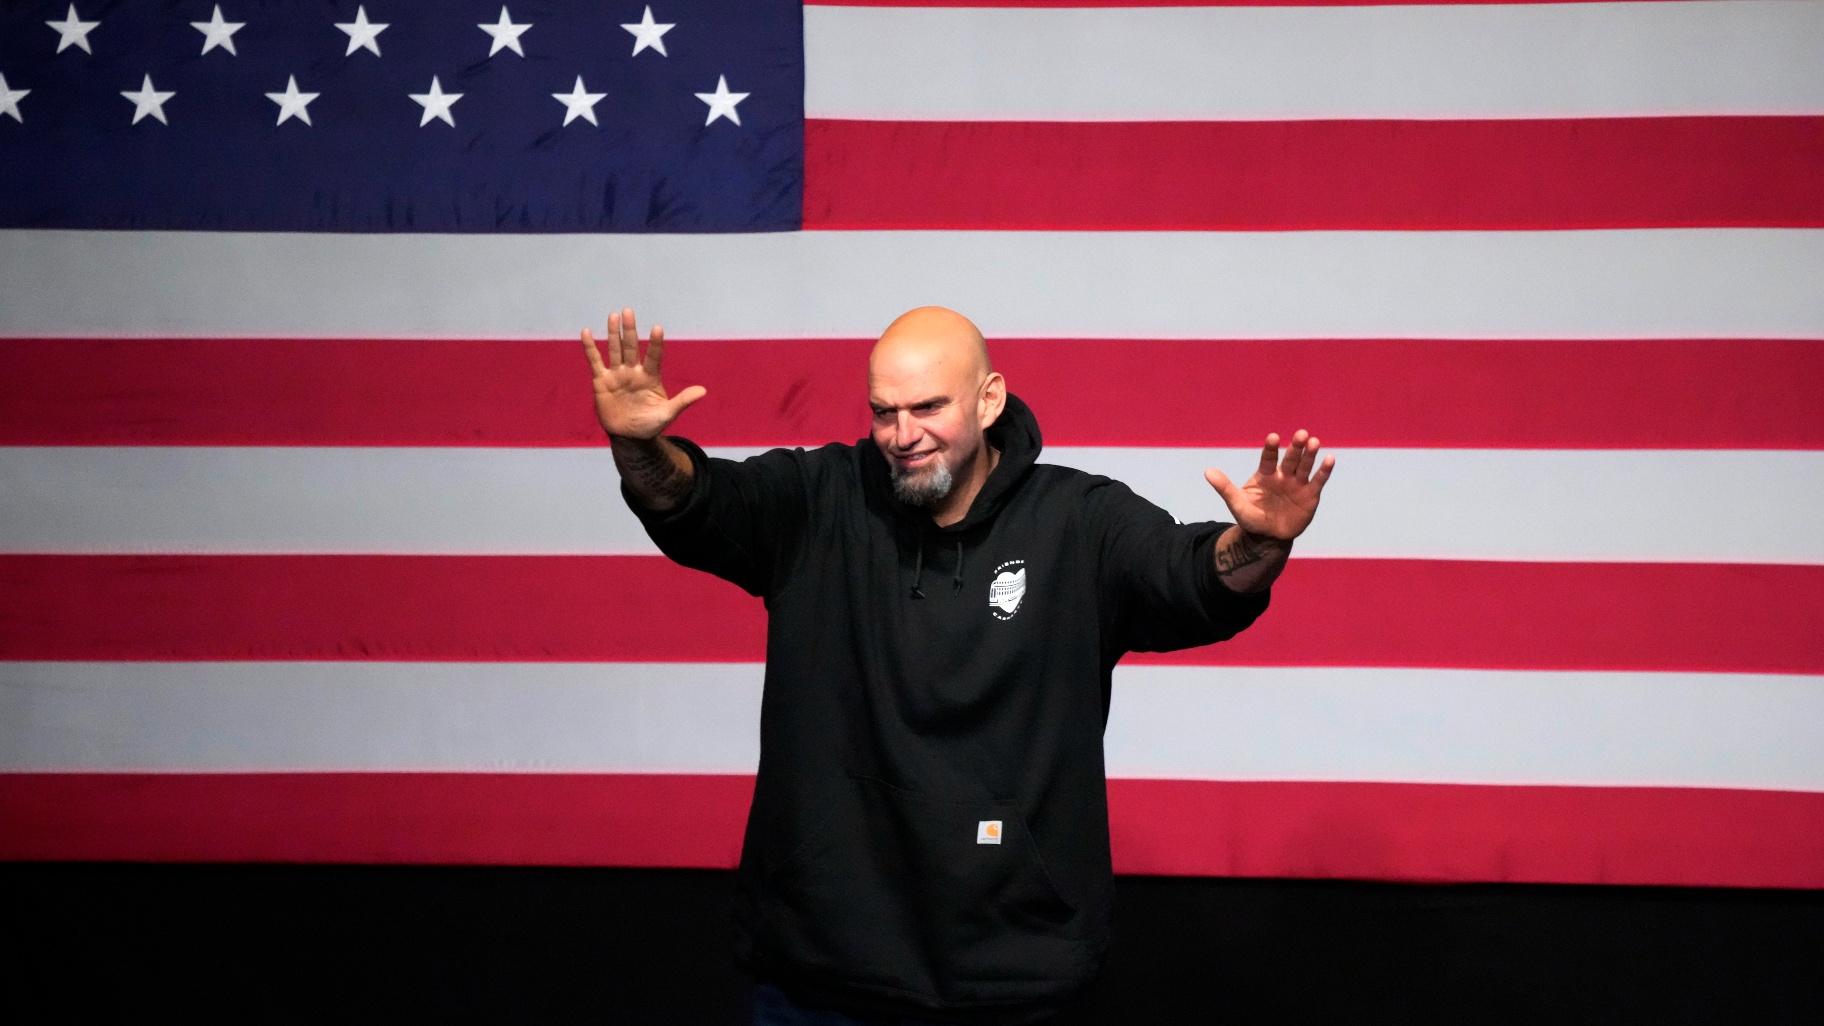 Pennsylvania Lt. Gov. John Fetterman, Democratic candidate for U.S. Senate, waves to supporters after addressing an election night party in Pittsburgh, Wednesday, Nov. 9, 2022. (AP Photo / Gene J. Puskar)